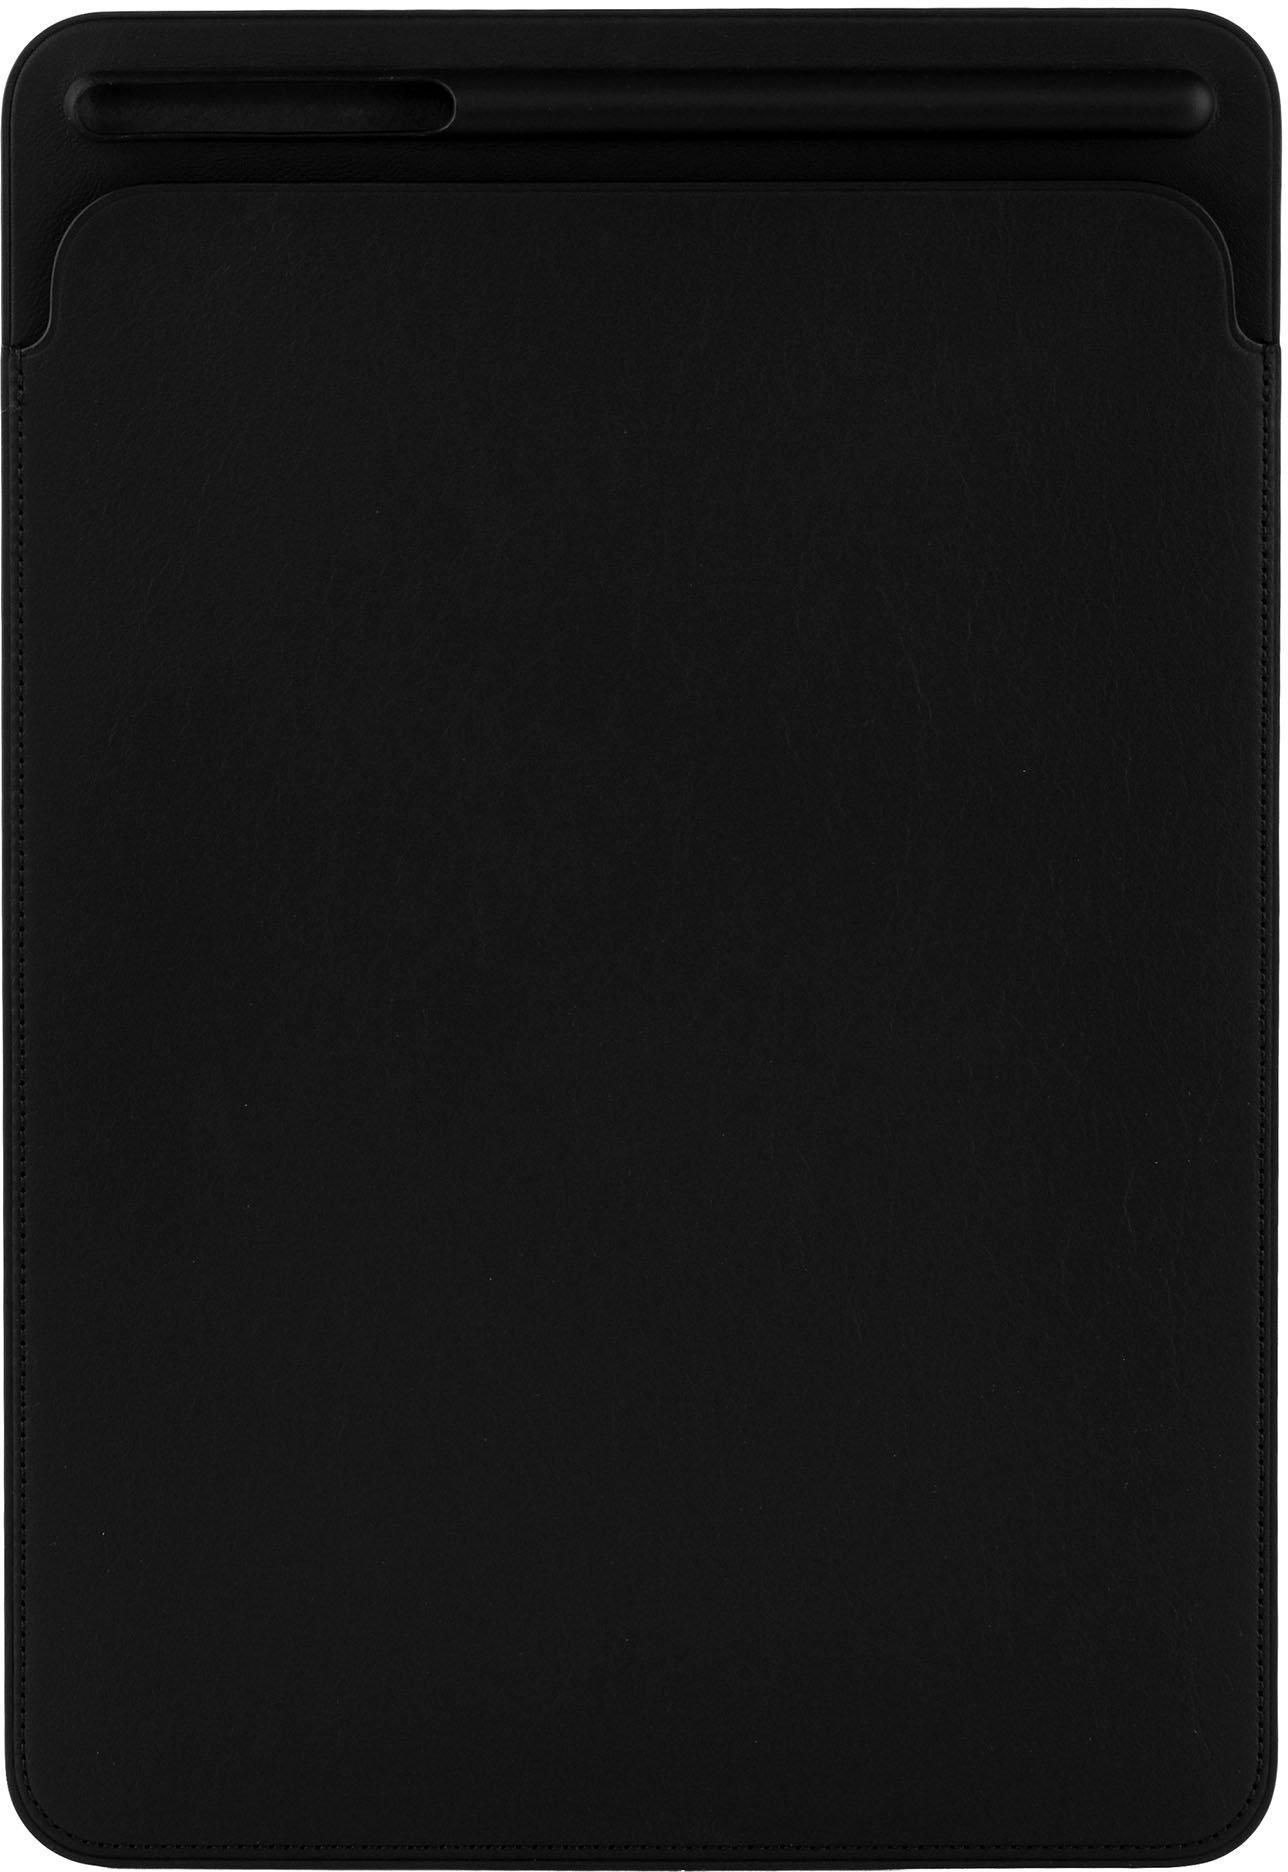 Apple Leather Smart Cover for 10.5-inch iPad Pro, Air 3rd Gen, 7th & 8th Gen,Black